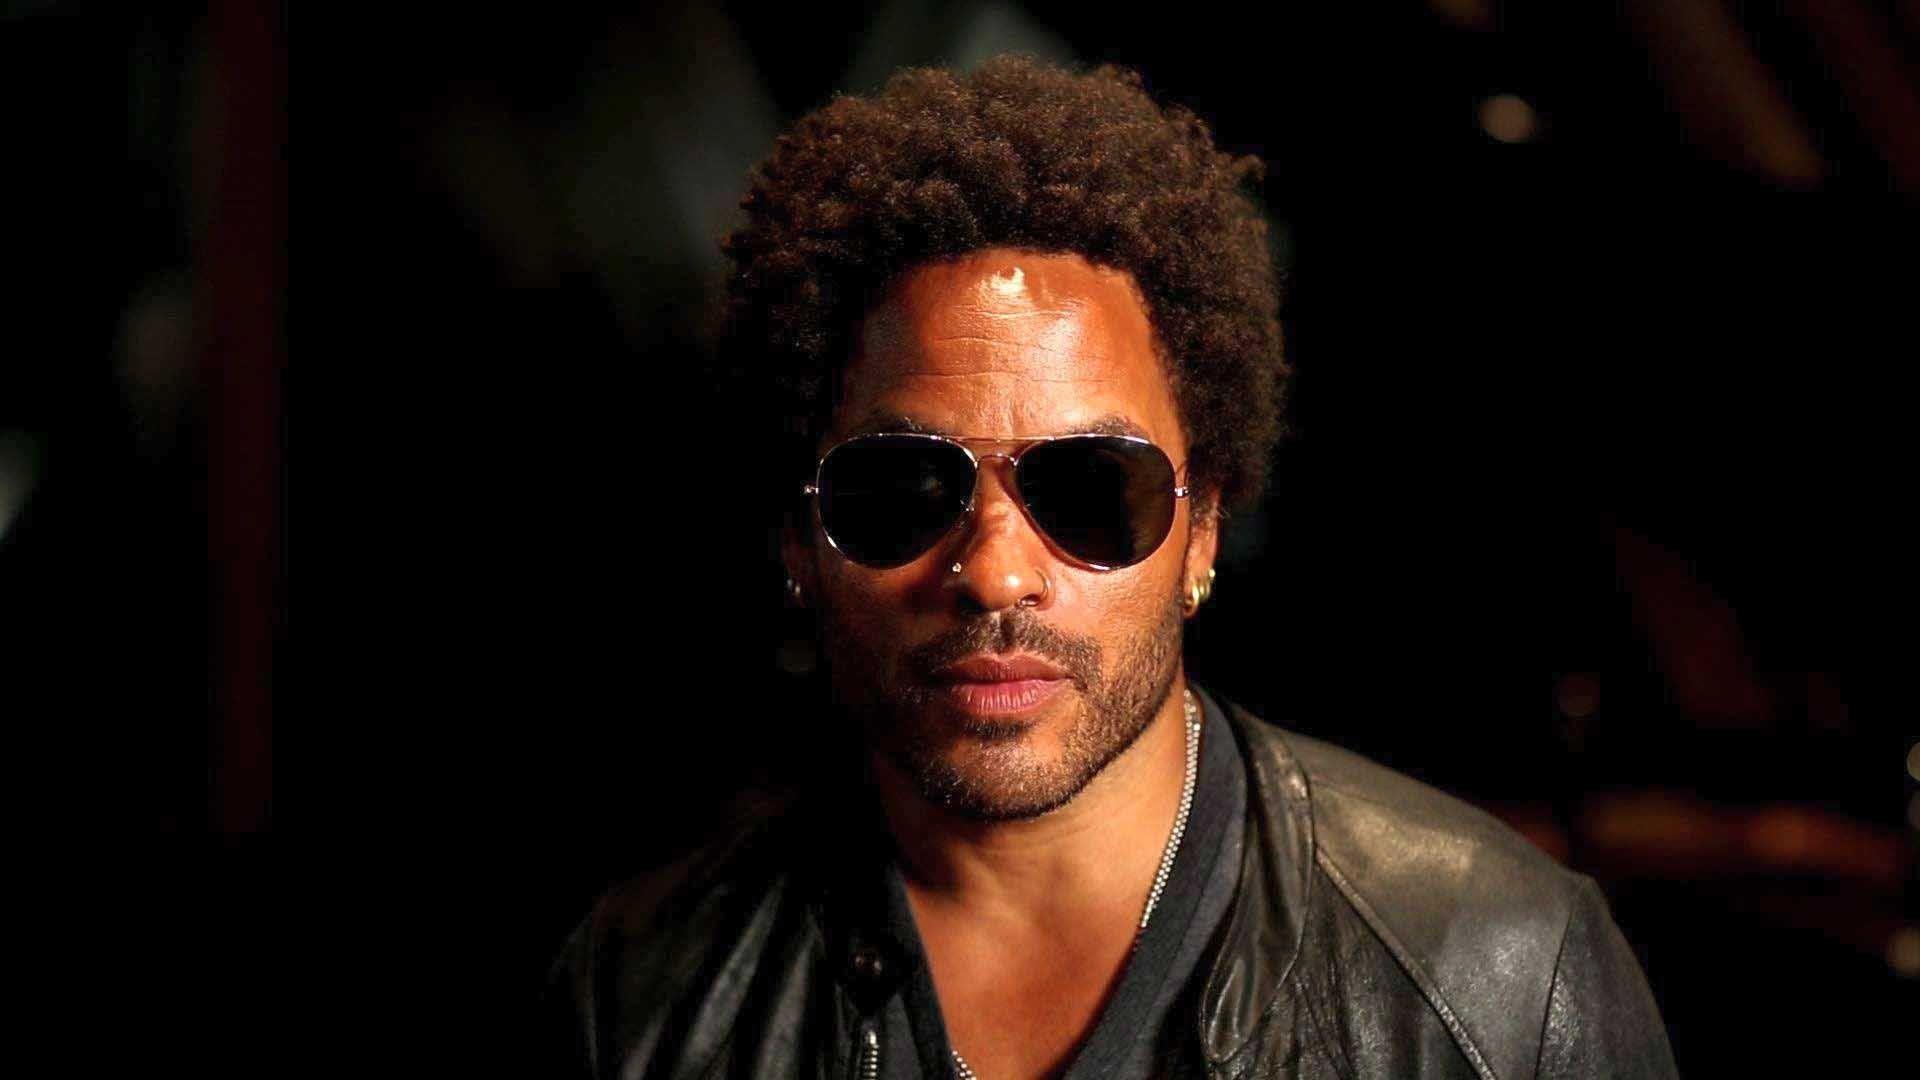 Lenny Kravitz new music, concerts, photo, and official news updates